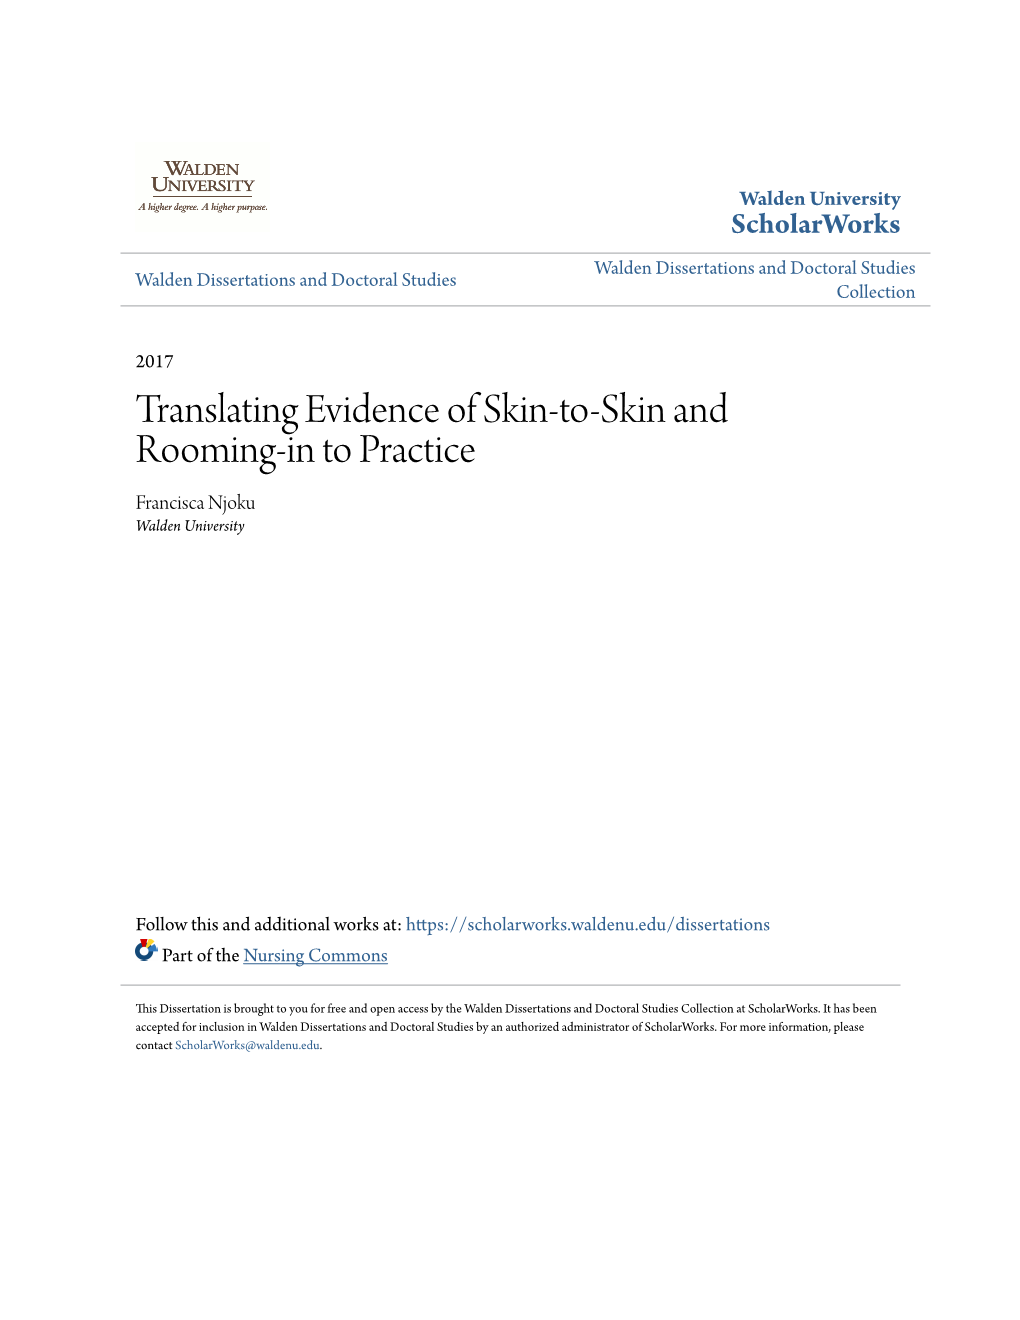 Translating Evidence of Skin-To-Skin and Rooming-In to Practice Francisca Njoku Walden University